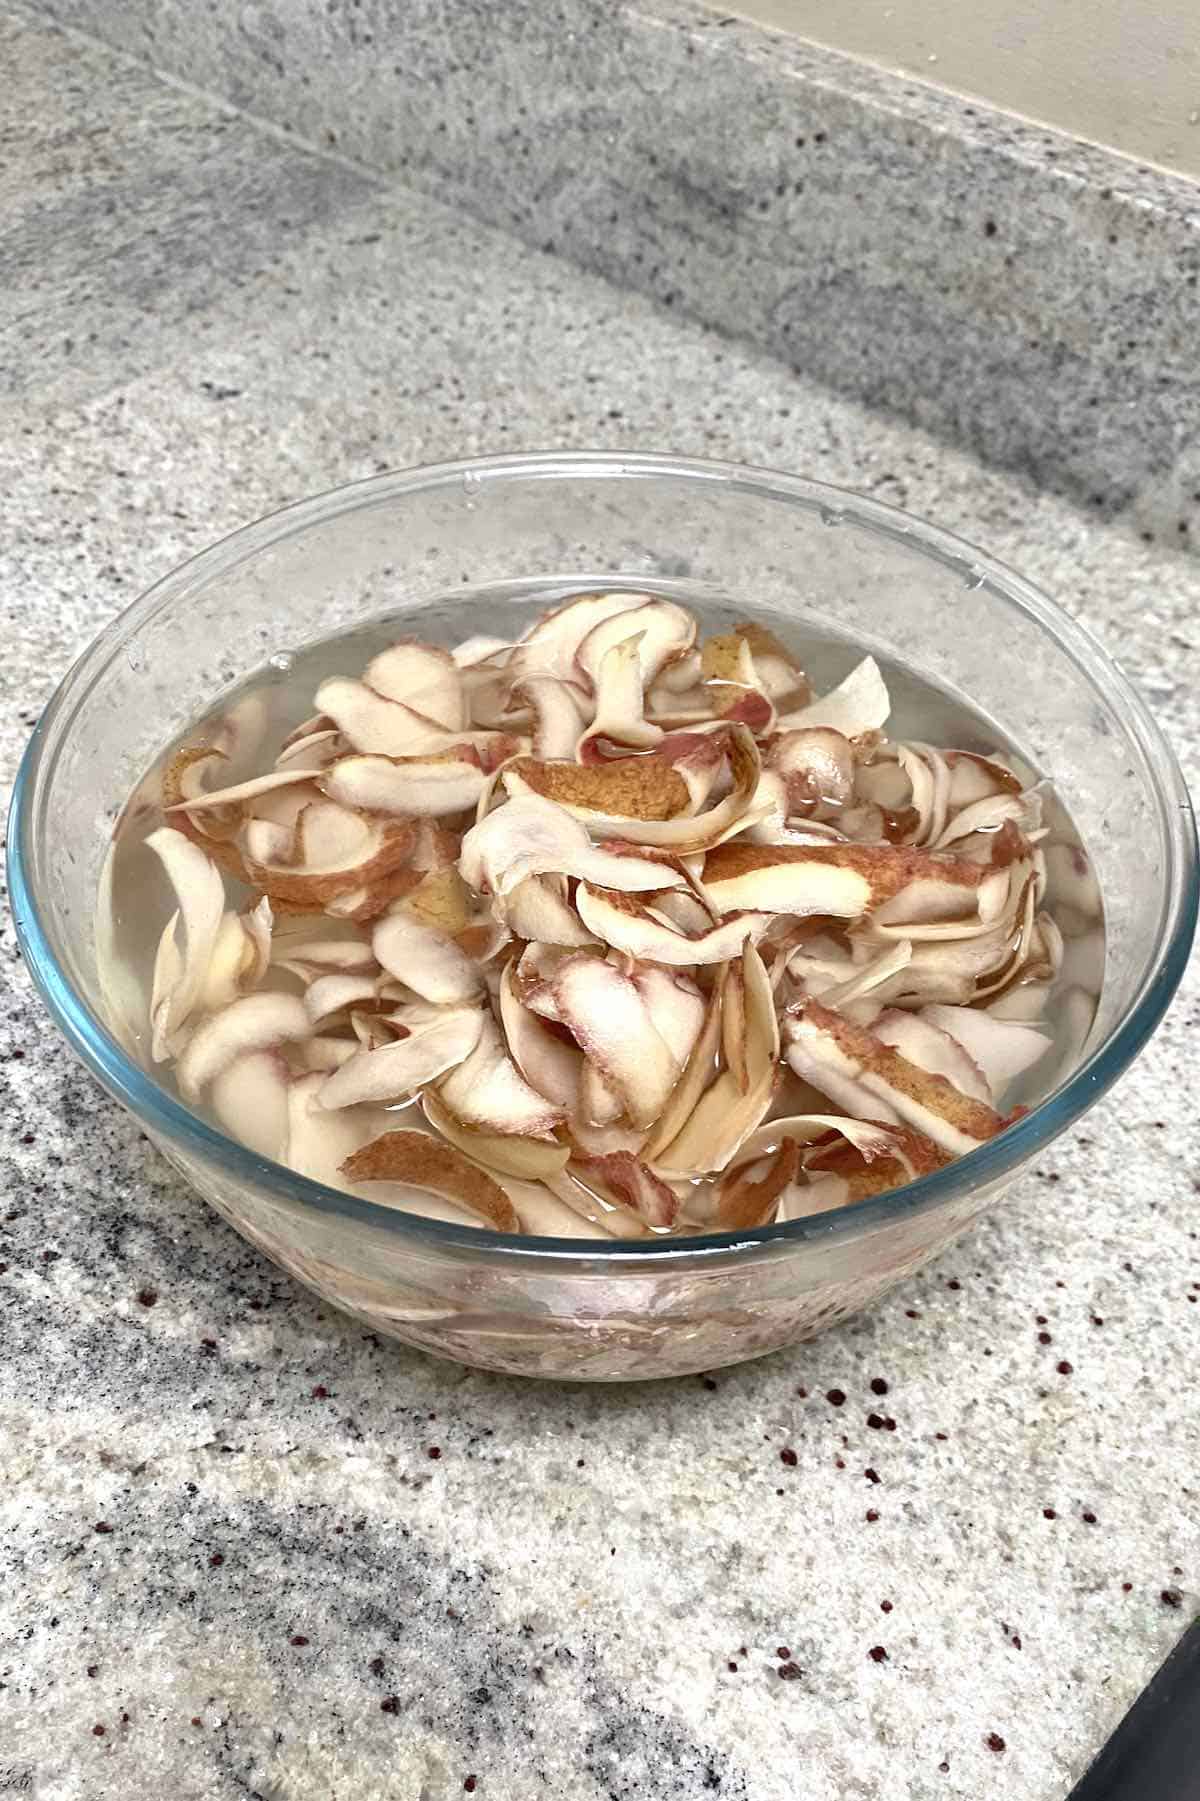 Potato peels soaking in a bowl with water